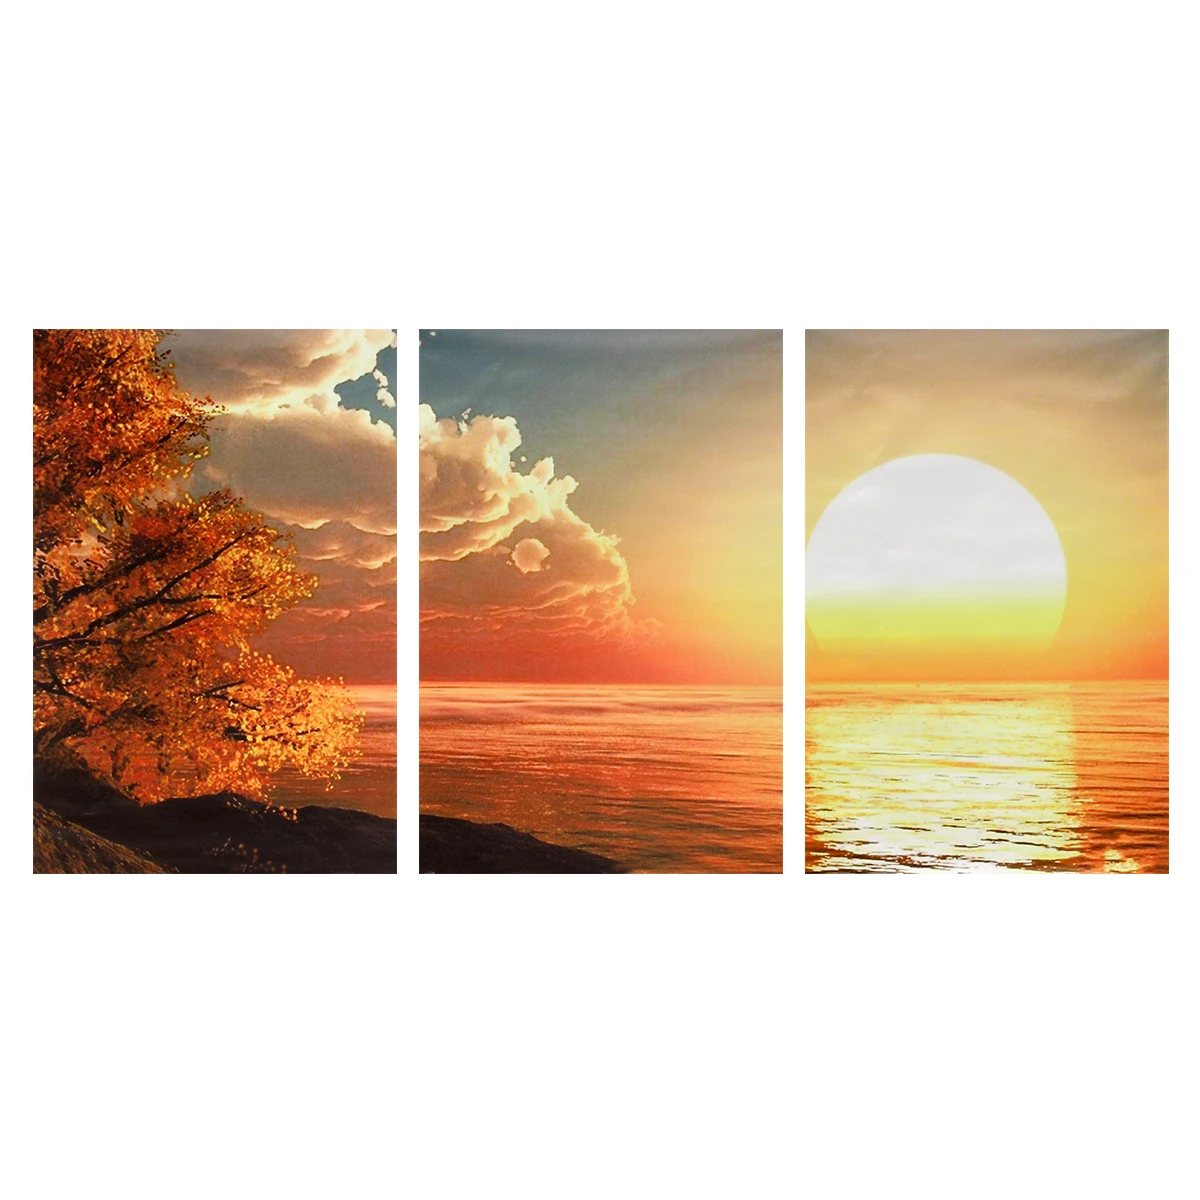 3 Cascade Day Sunset Scene Canvas Painting Decorative Wall Picture Home Decoration Unframed 